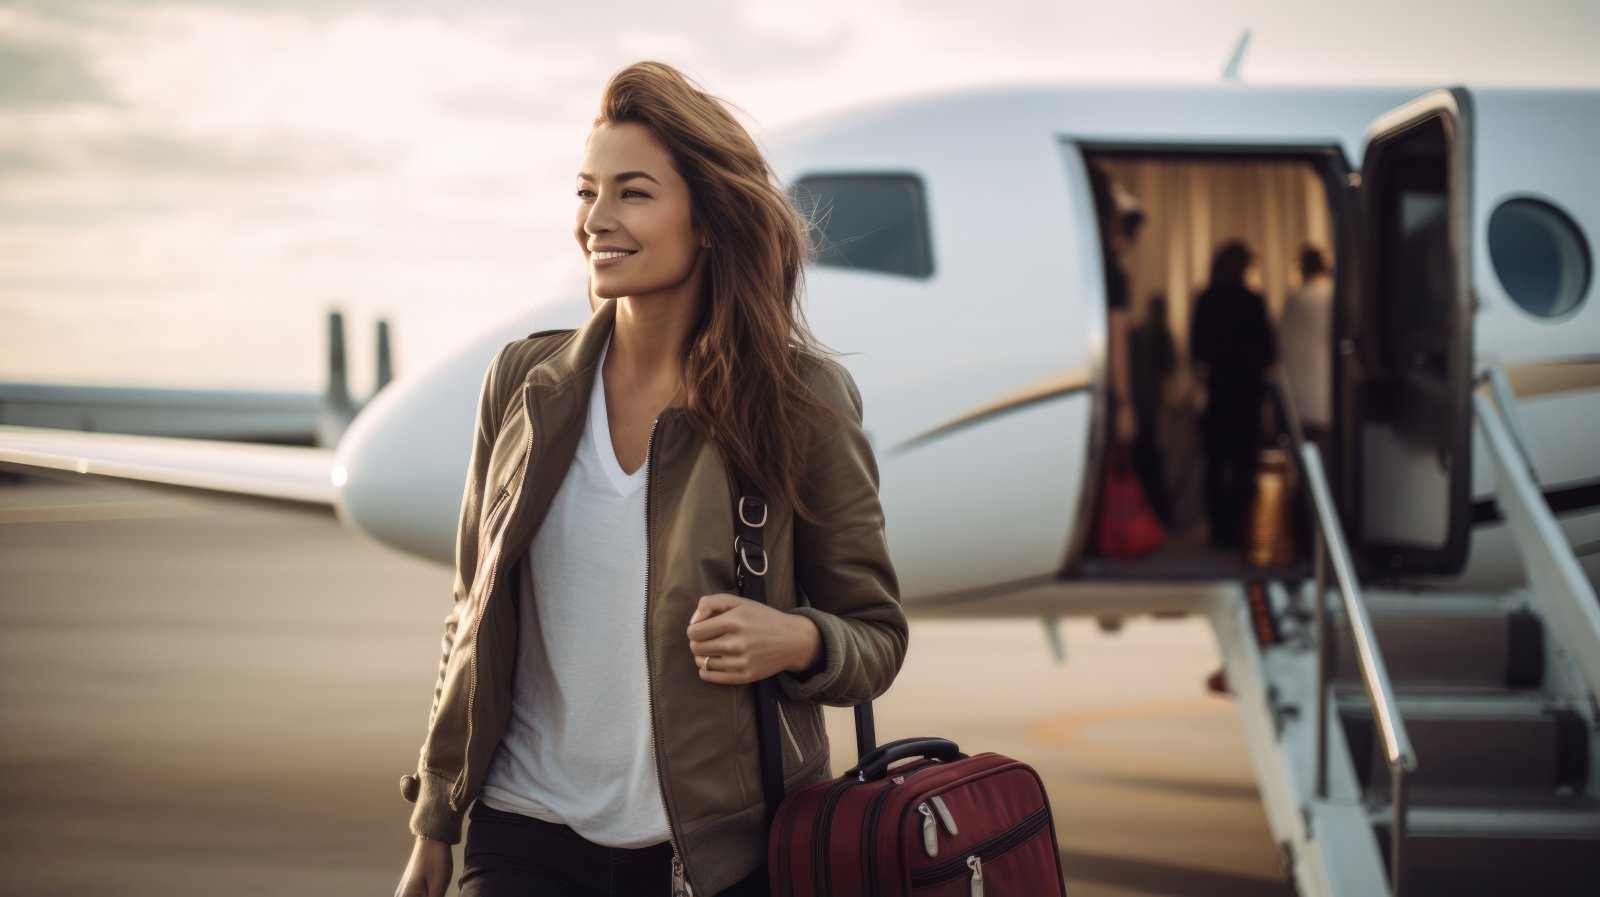 <p>Travelers who want luxury are choosing private flights more. They like the exclusivity, flexibility, and reliability. Companies like Jet Edge, NetJets, and XO are adding special features. These include private lounges and custom food.</p>